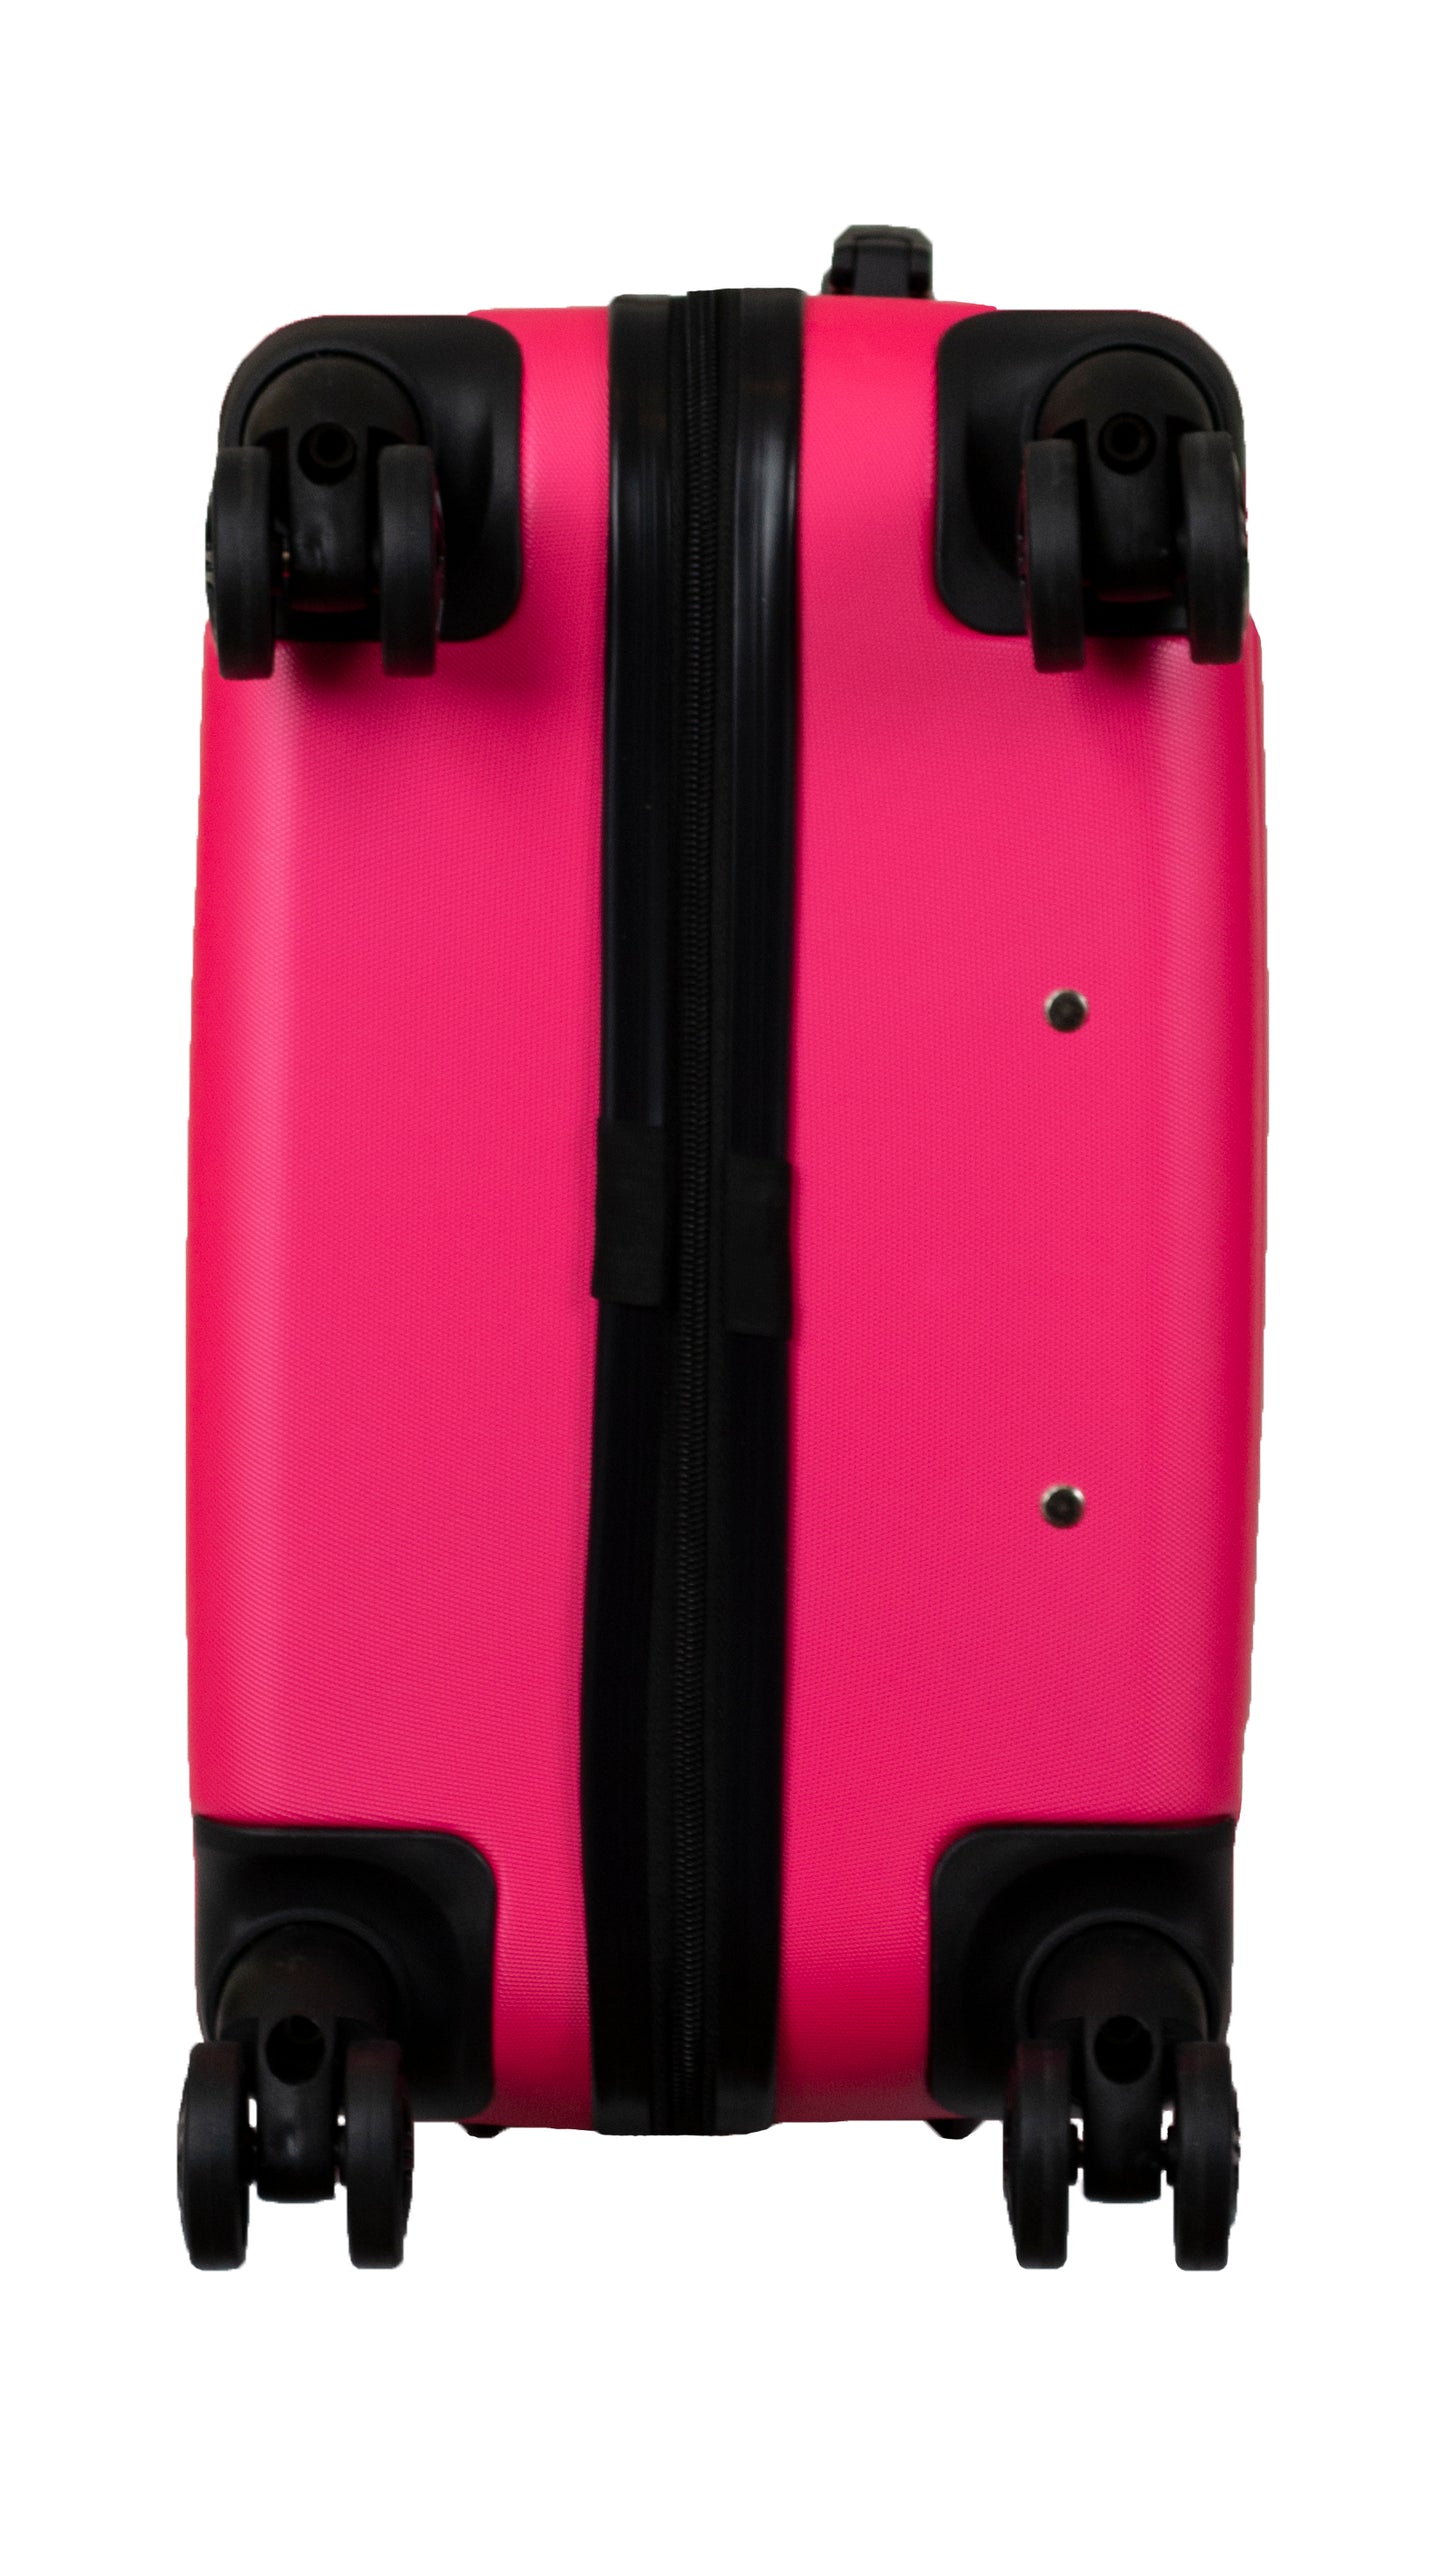 Hard Shell Suitcase with 4 Spinner Wheels, Hot Pink